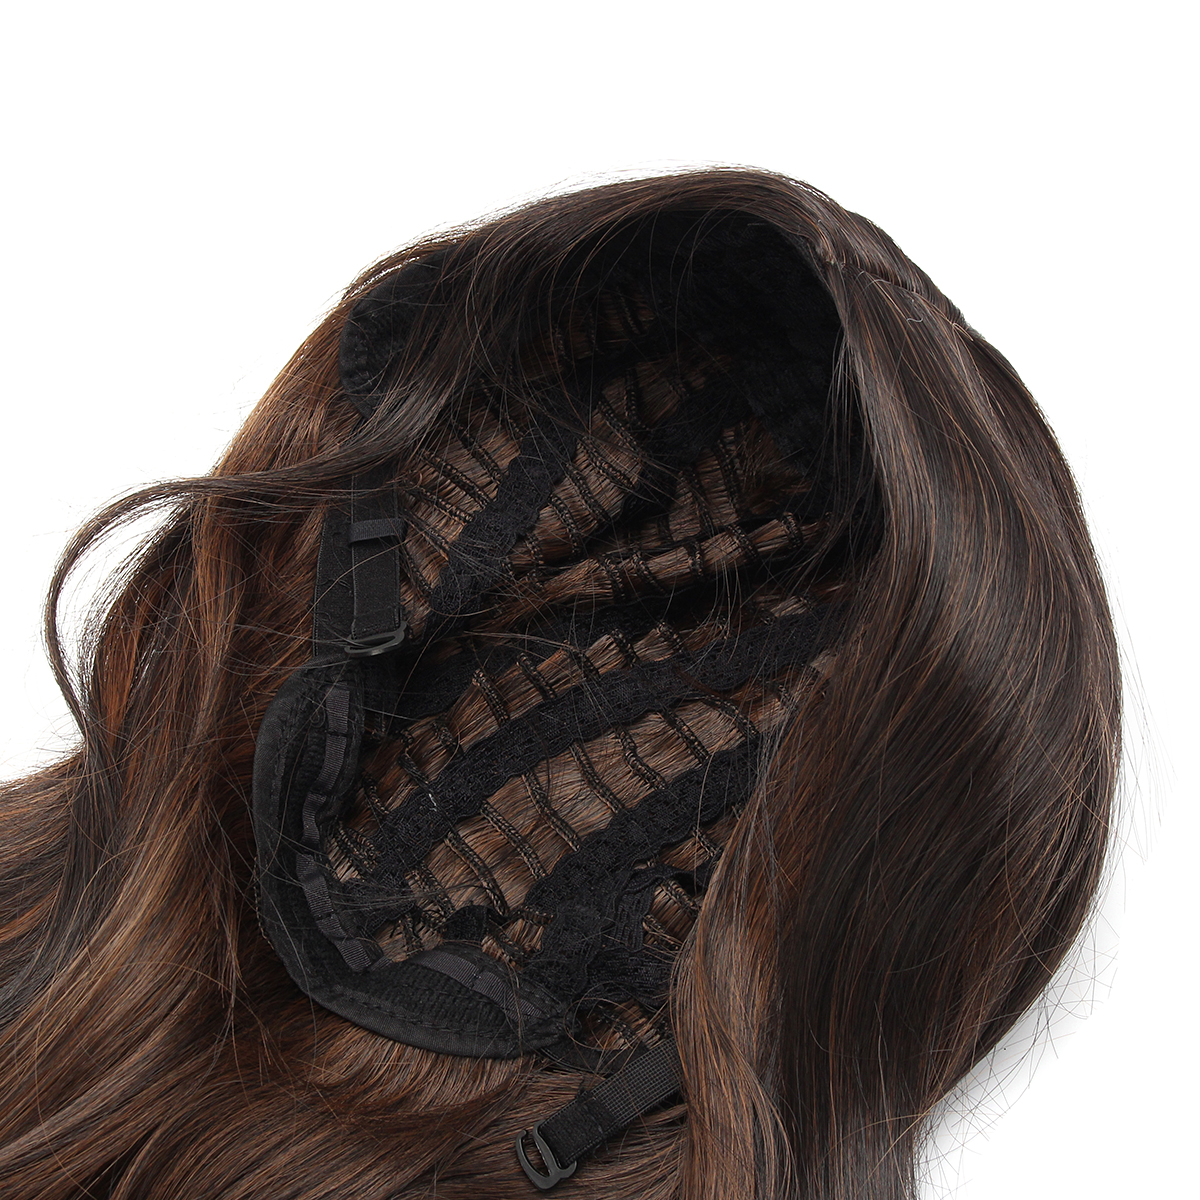 Womens-Long-Wavy-Curly-Hair-Synthetic-Wig-Black-Brown-Ombre-Cosplay-Party-Wig-1354613-5